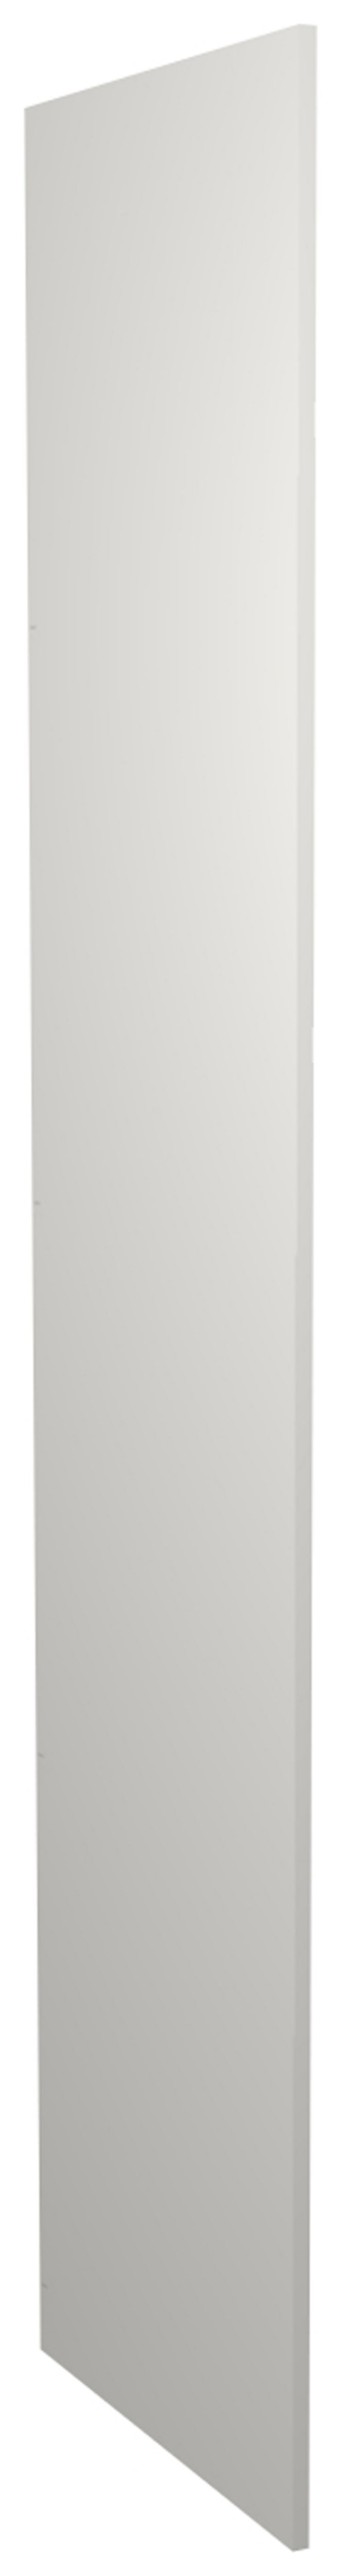 Image of Wickes Vermont Grey Tower Decor End Panel - 18mm